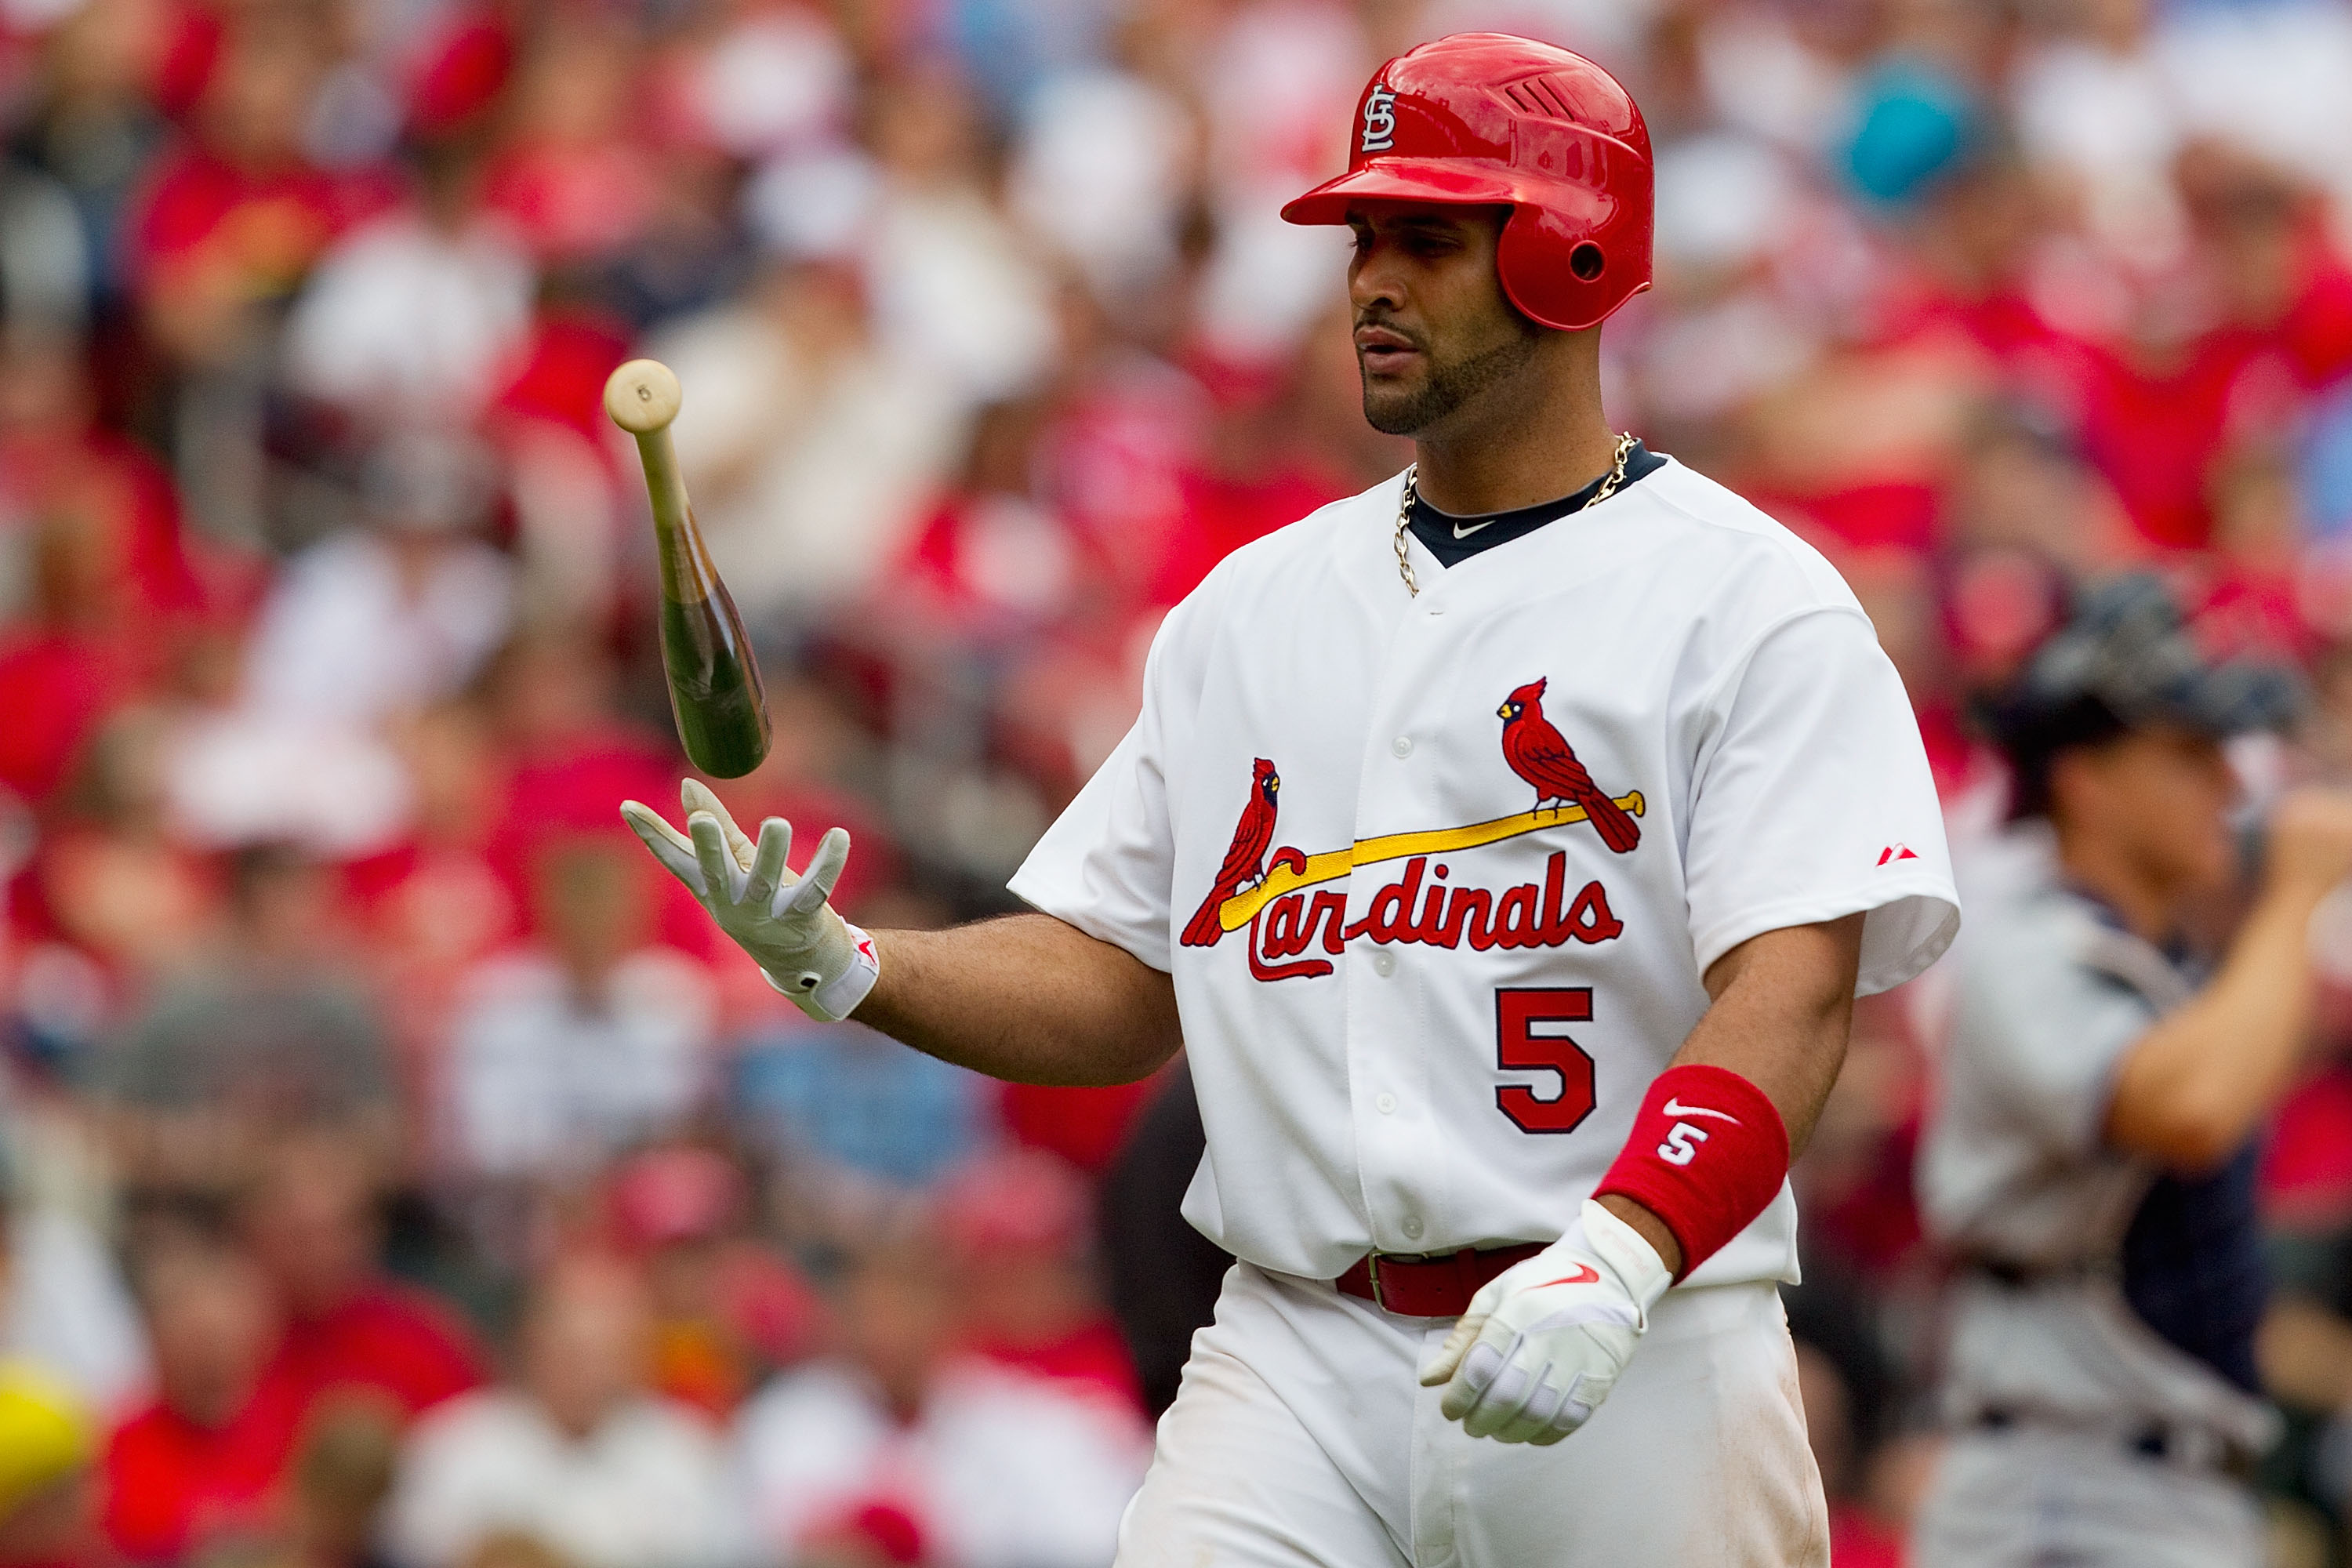 Talkin' Baseball on X: Albert Pujols becomes the fourth player in